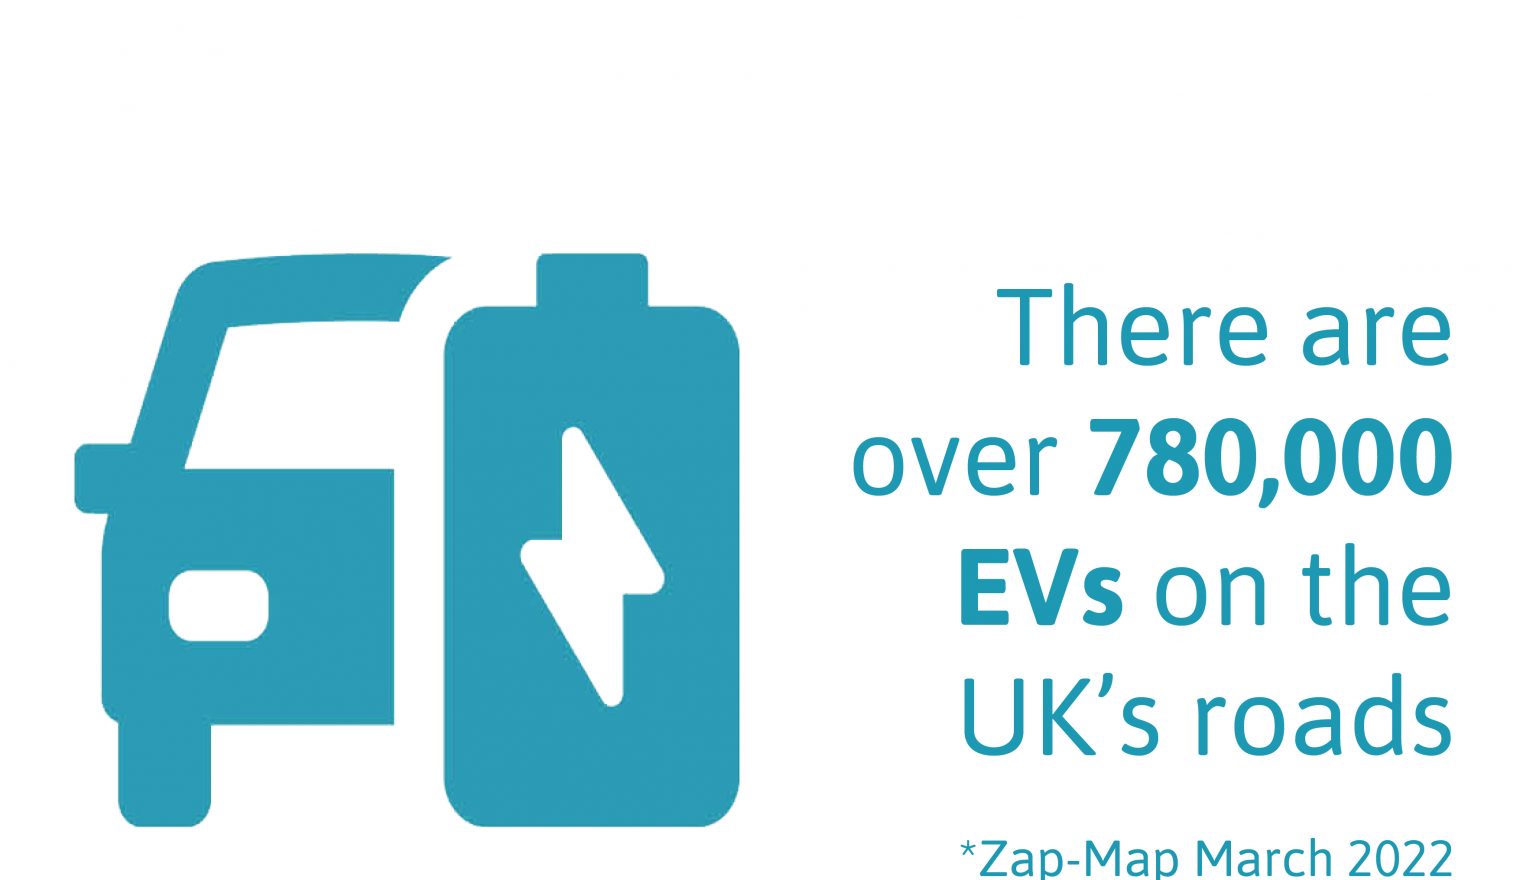 Graphic reds: There are over 780,000 EVs on the UK’s roads *Zap-Map March 2022